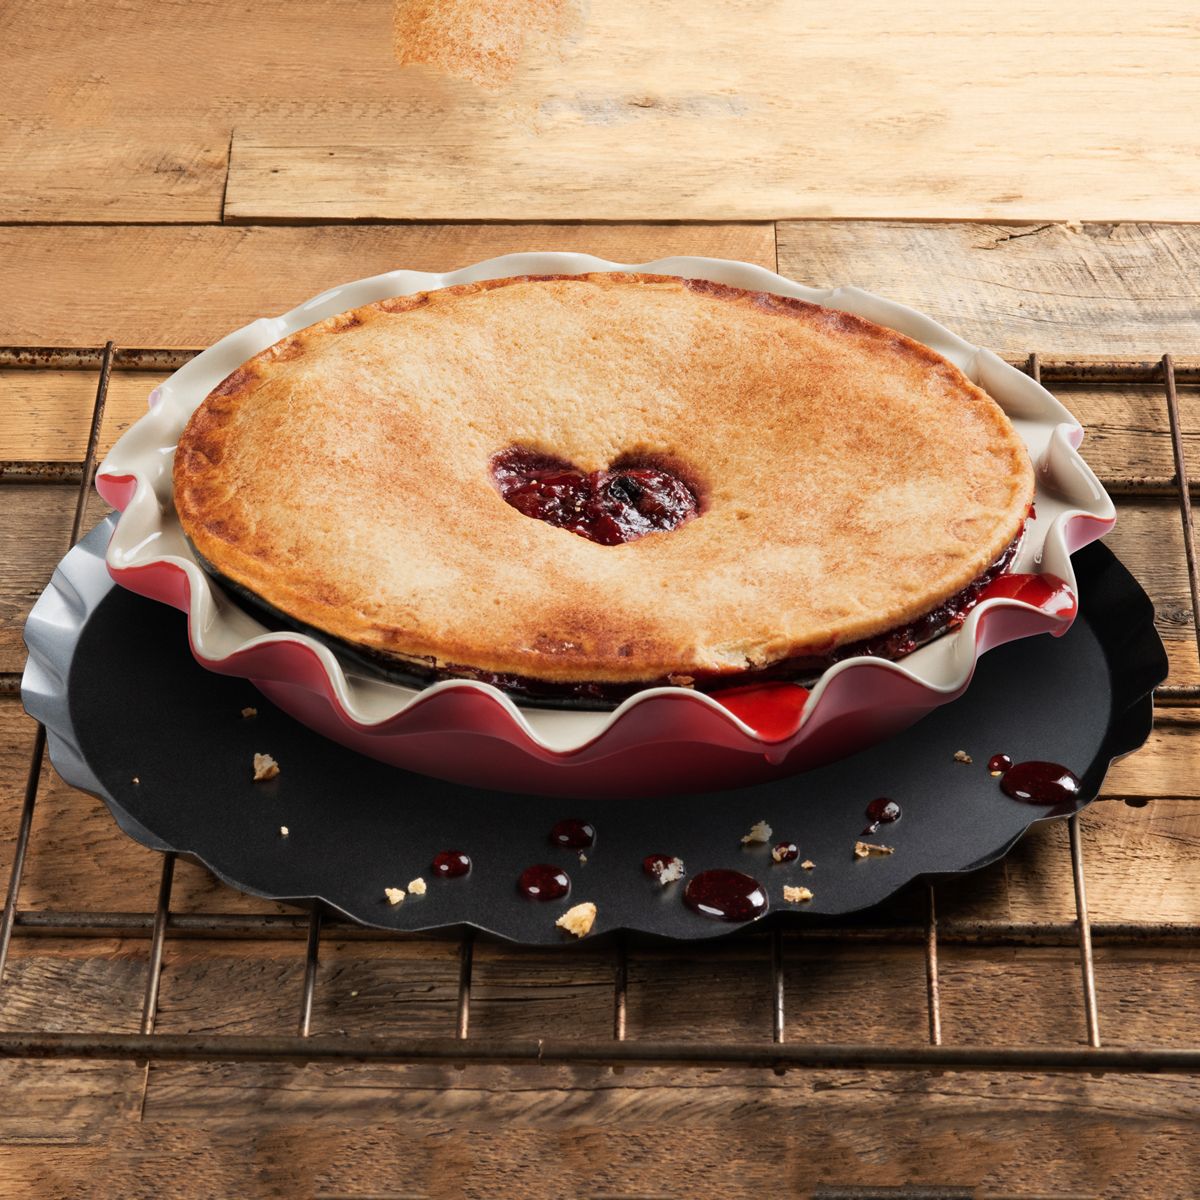 baking pie drip catcher displayed on a rustic wood slat surface with a baked pie resting on top